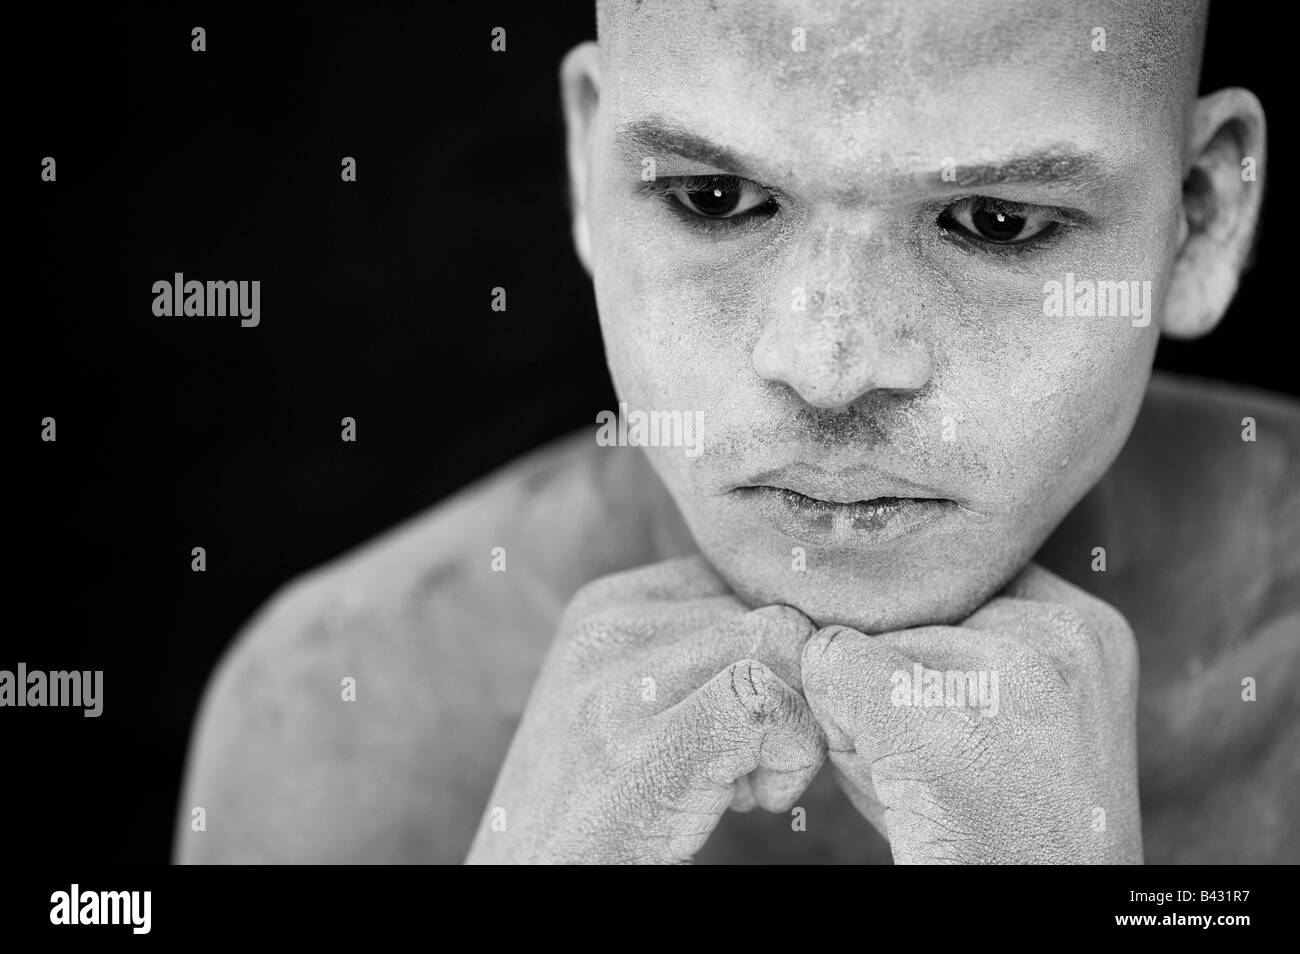 Young Indian man covered in sacred ash Stock Photo